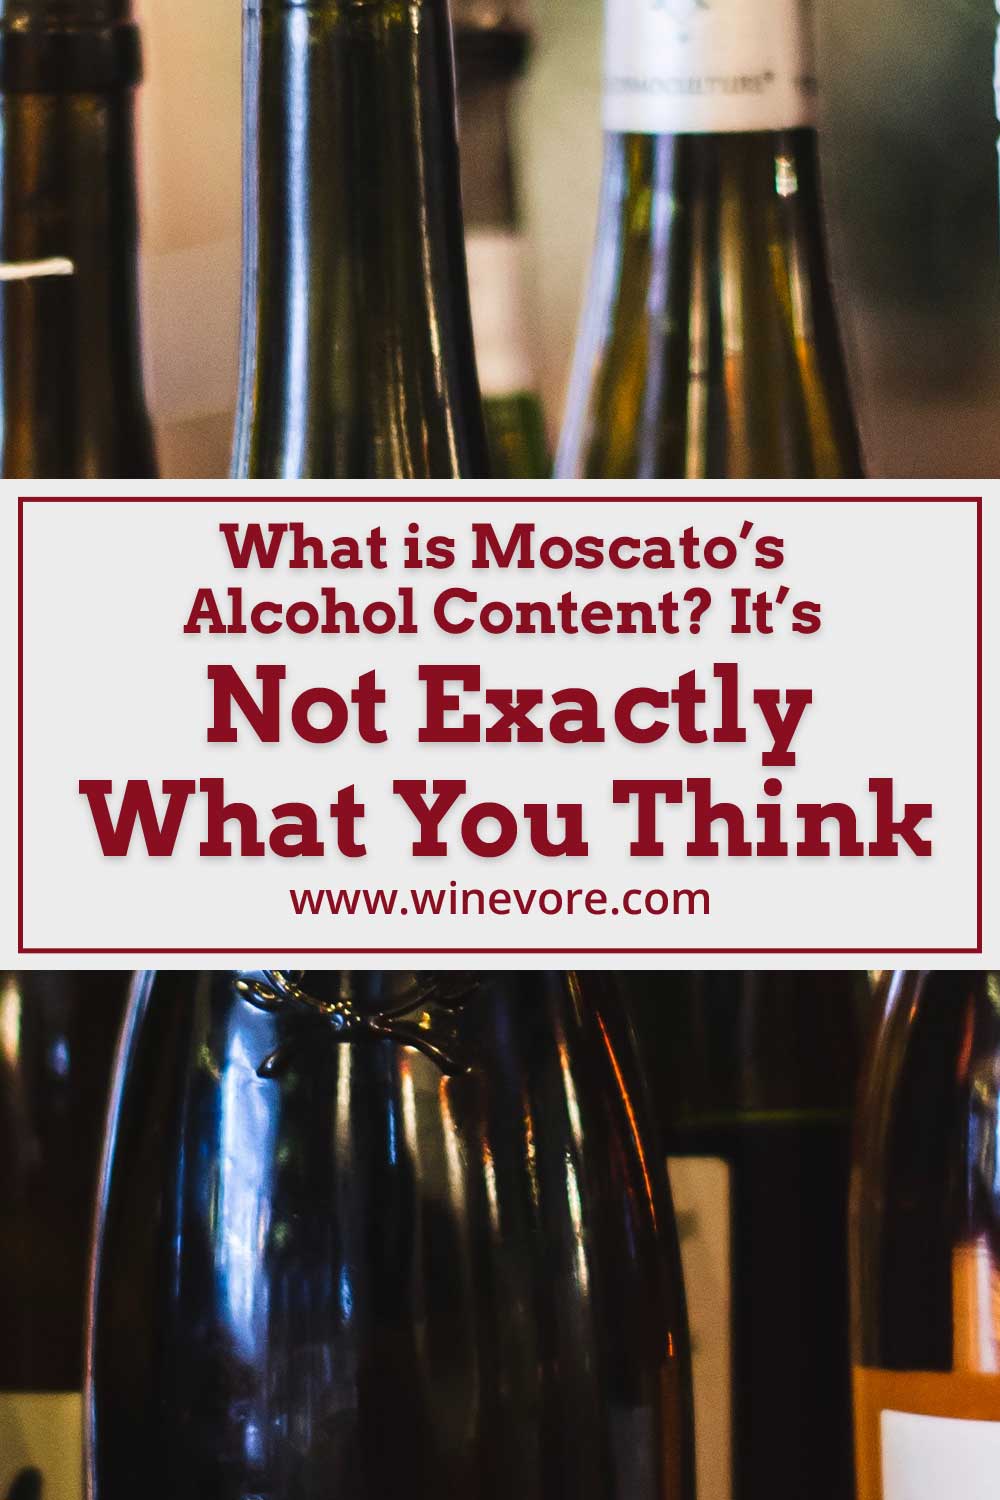 A few wine bottles - Moscato's Alcohol Content